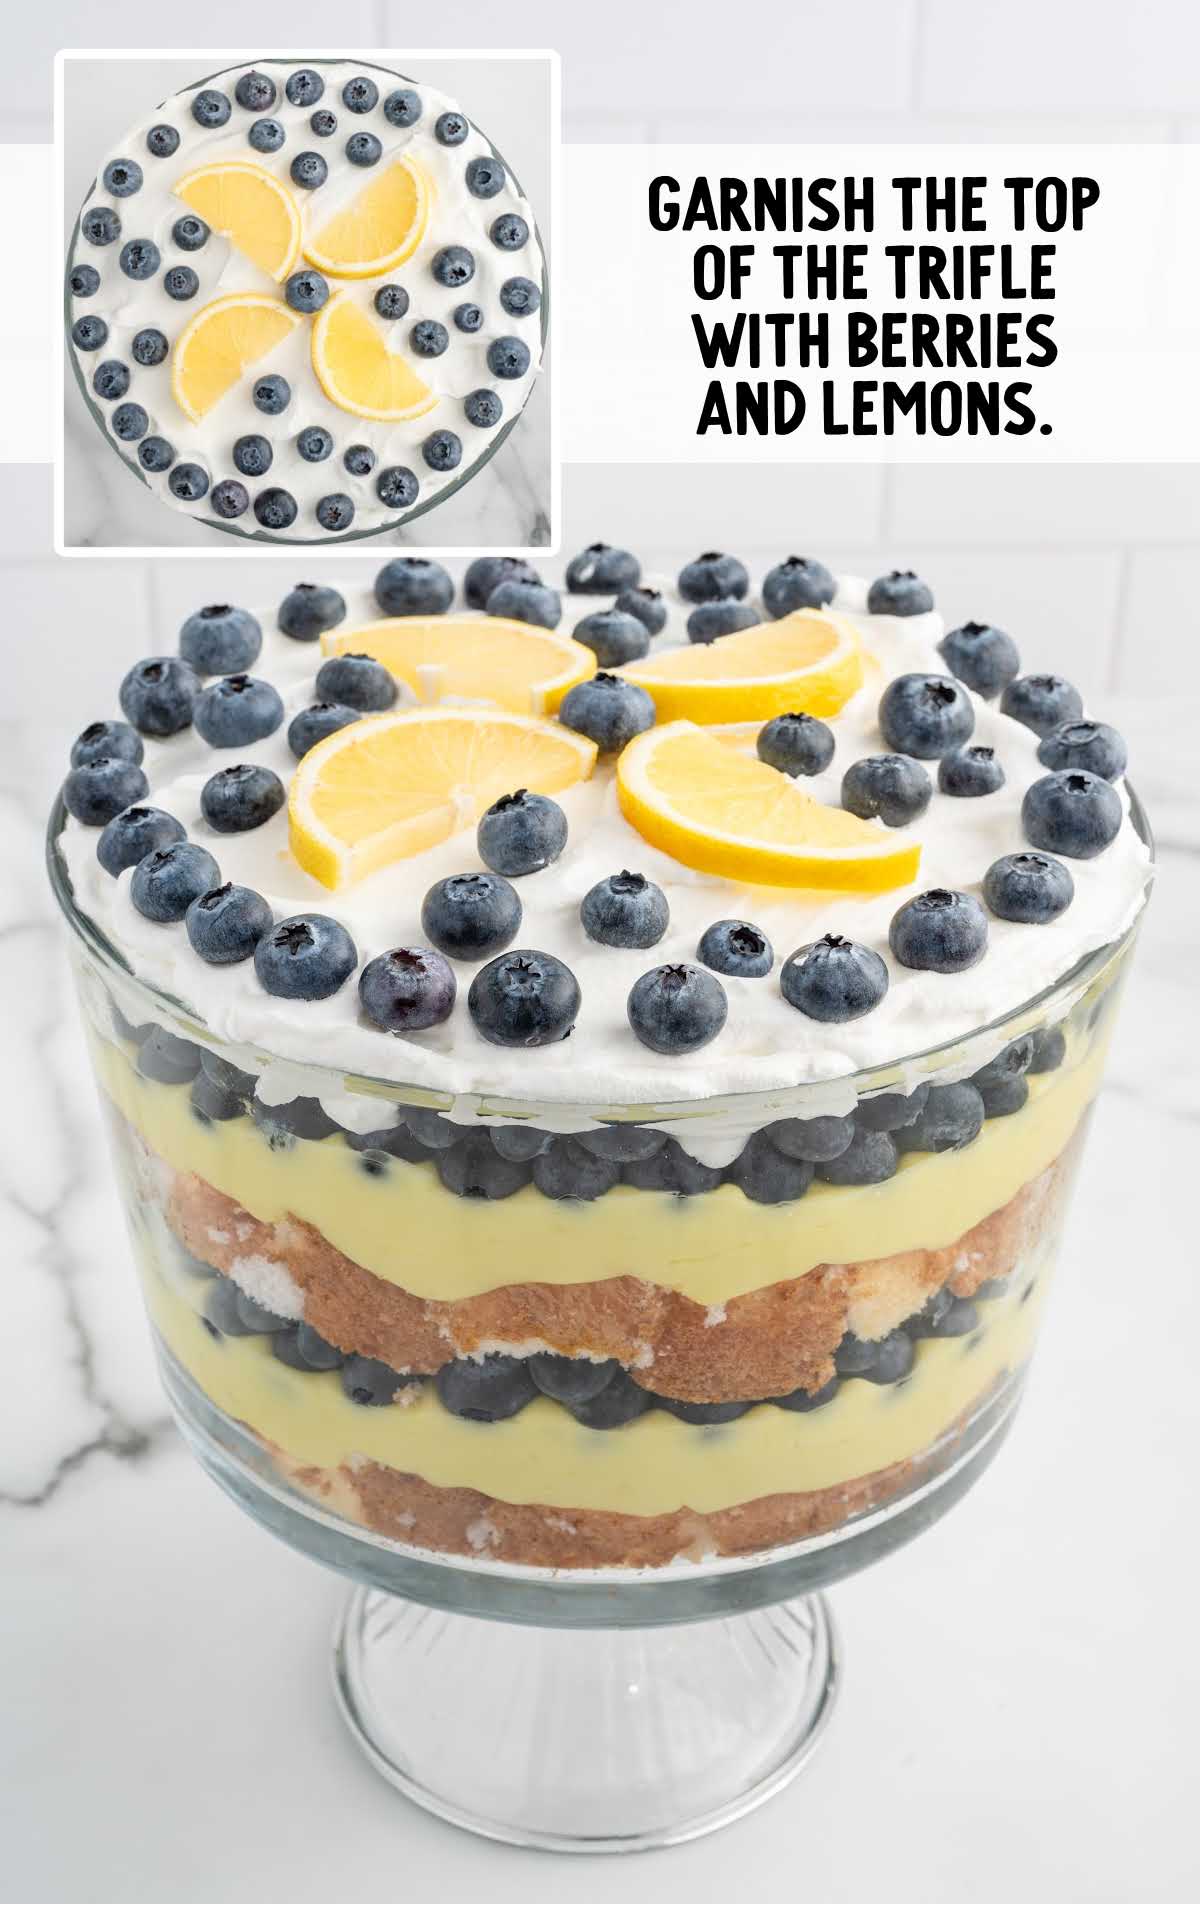 top of the trifle garnished with lemon slices and blueberries